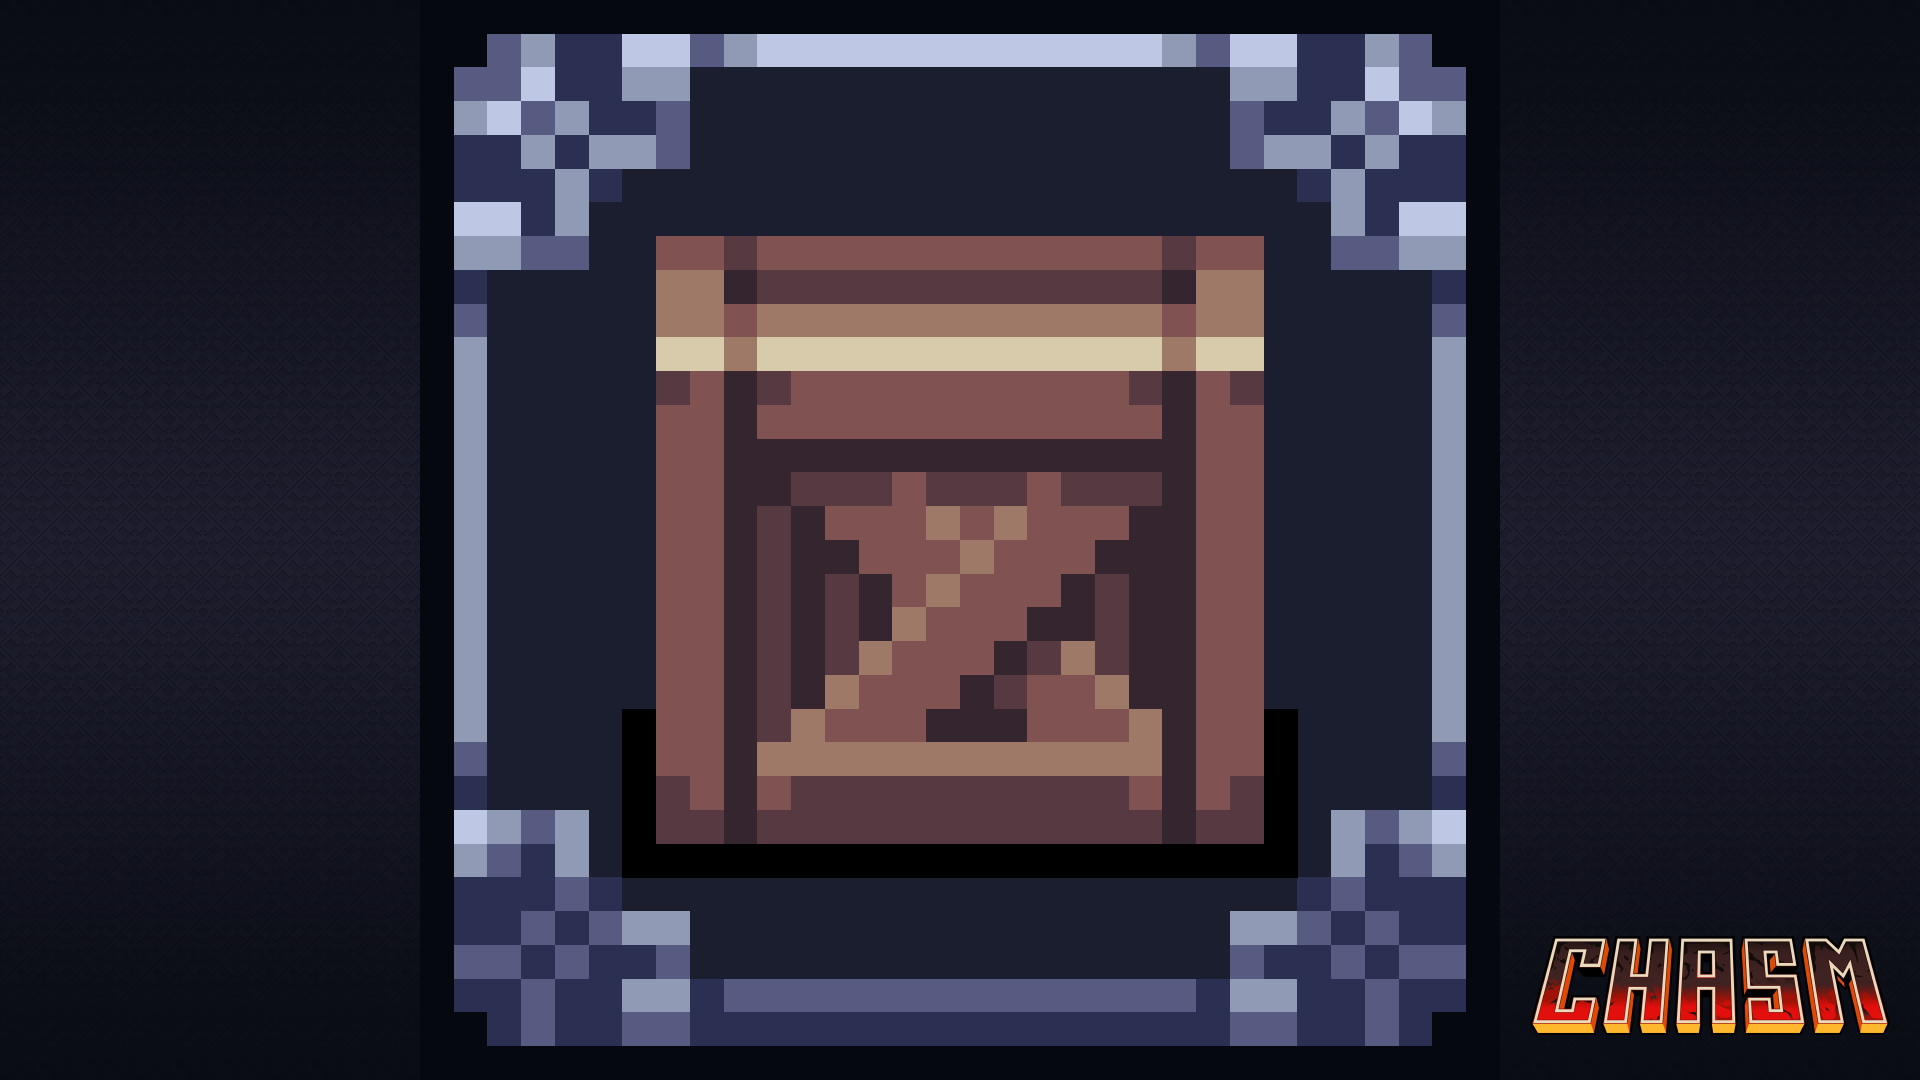 Icon for Crate Buster